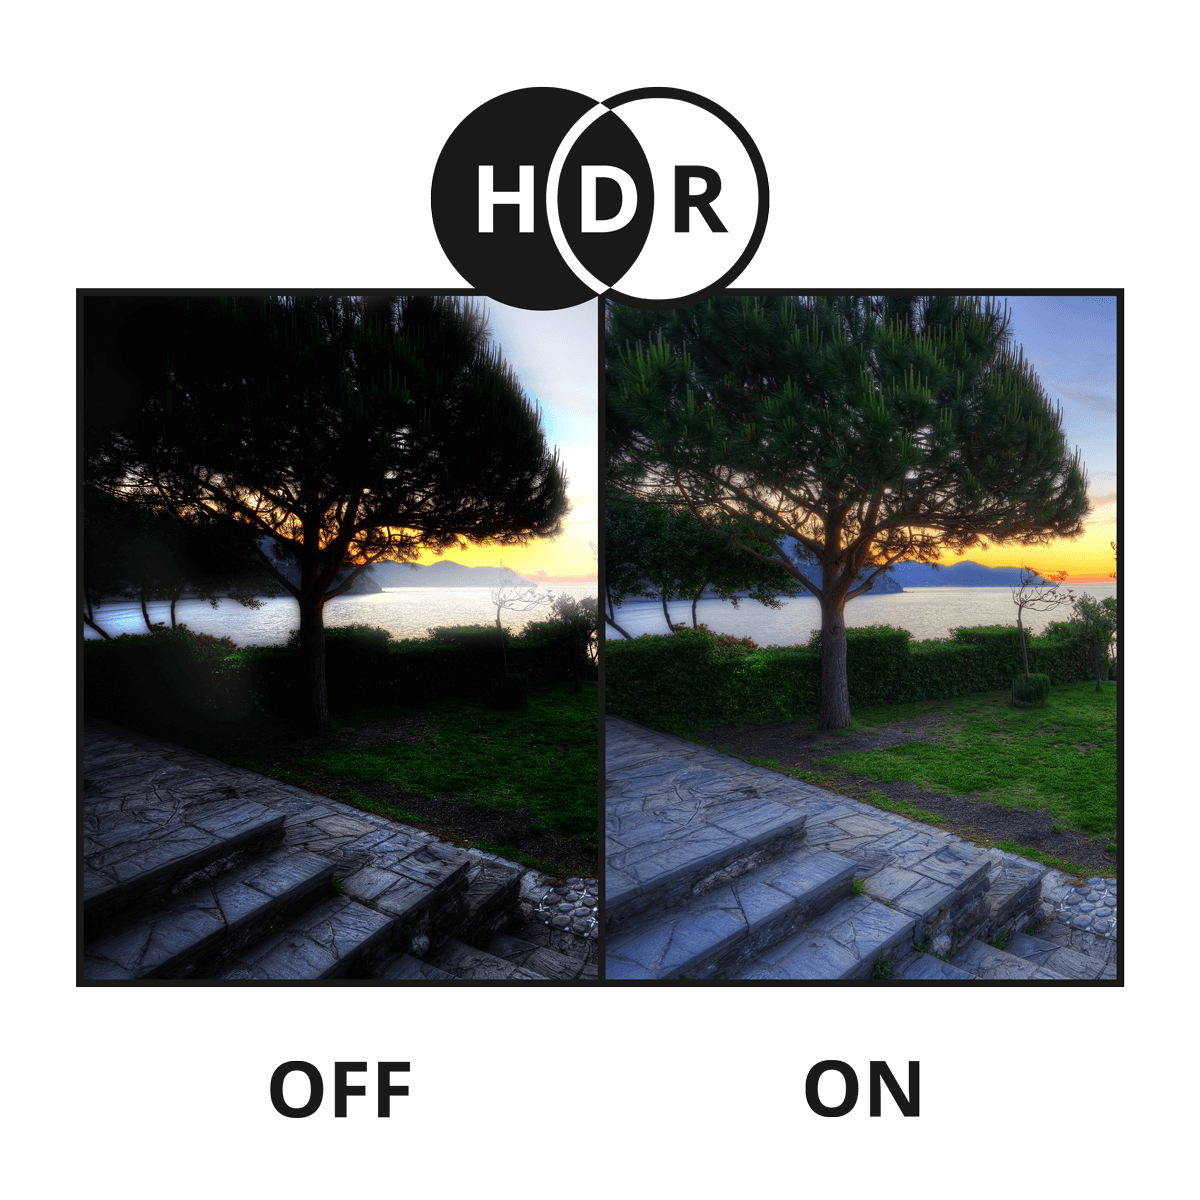 HDR nocturnal security camera